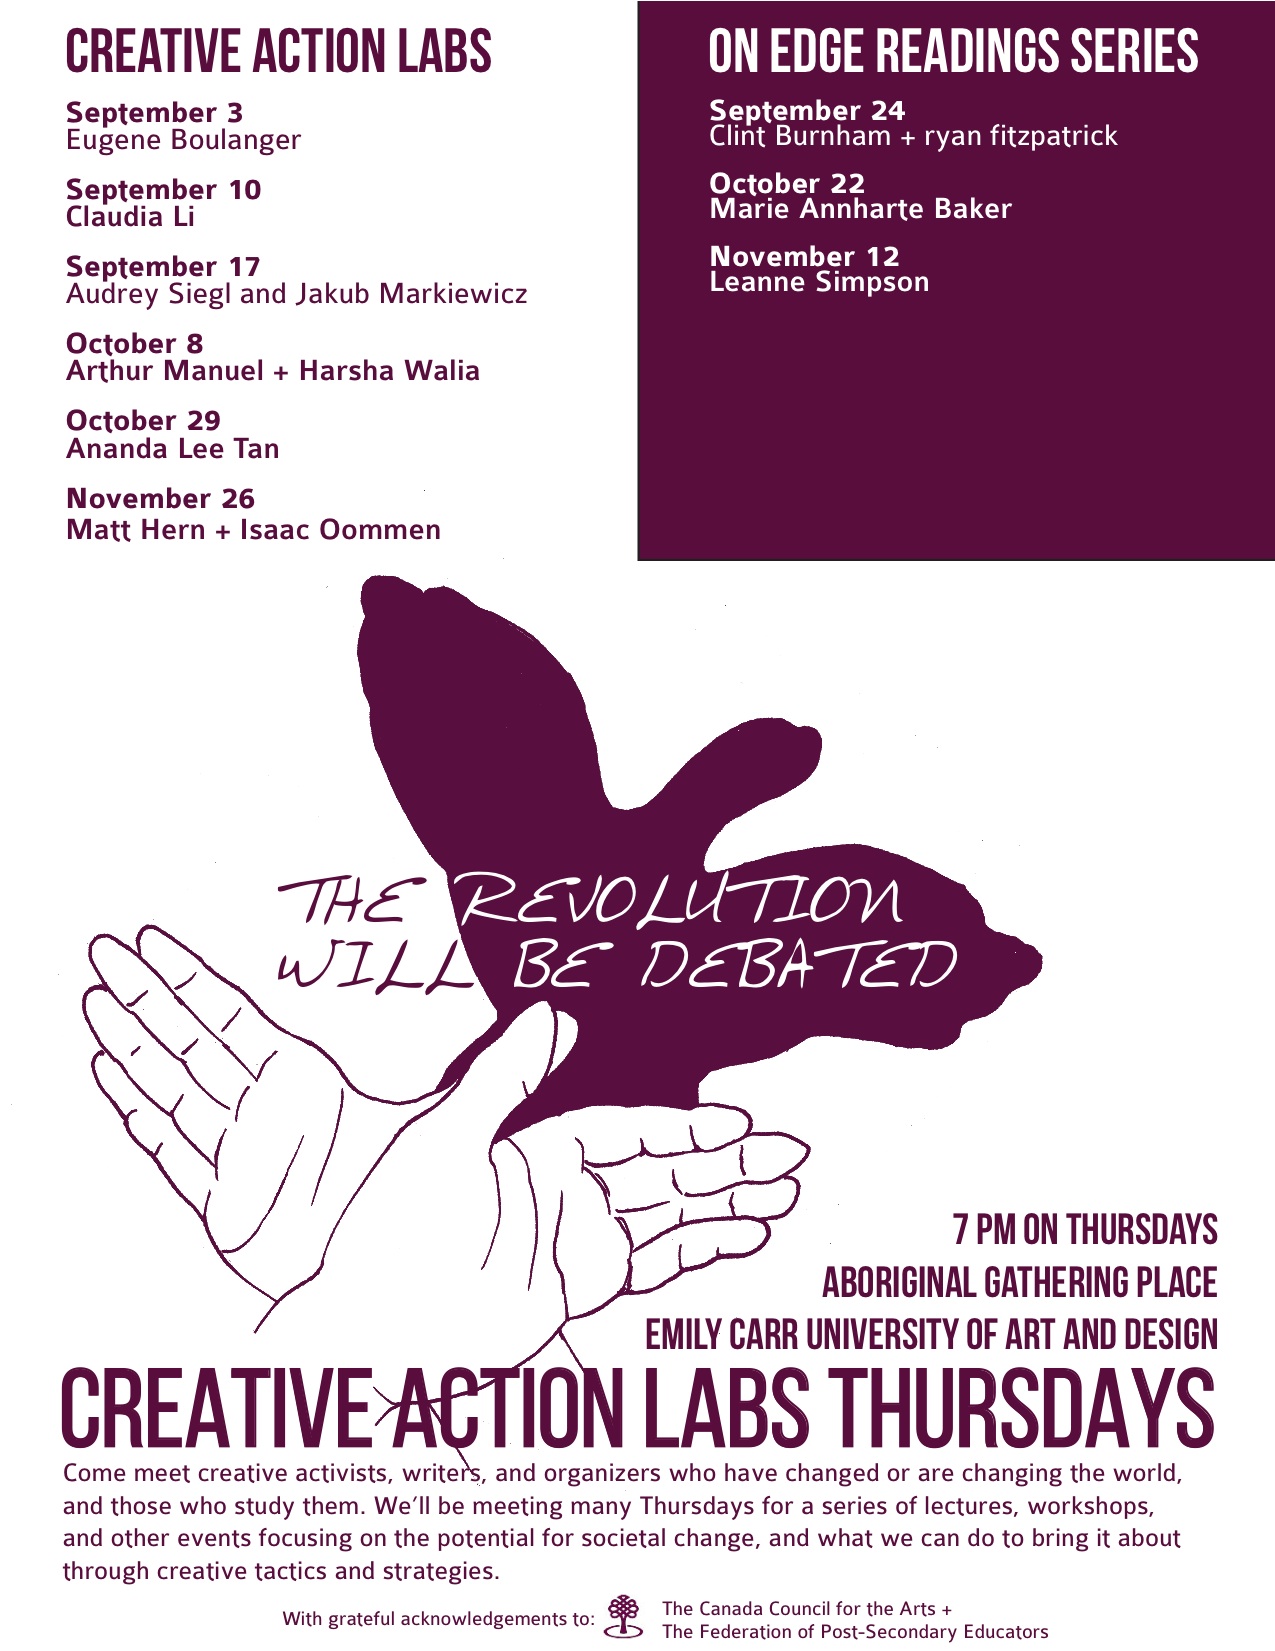 Creative-Action-Labs-3